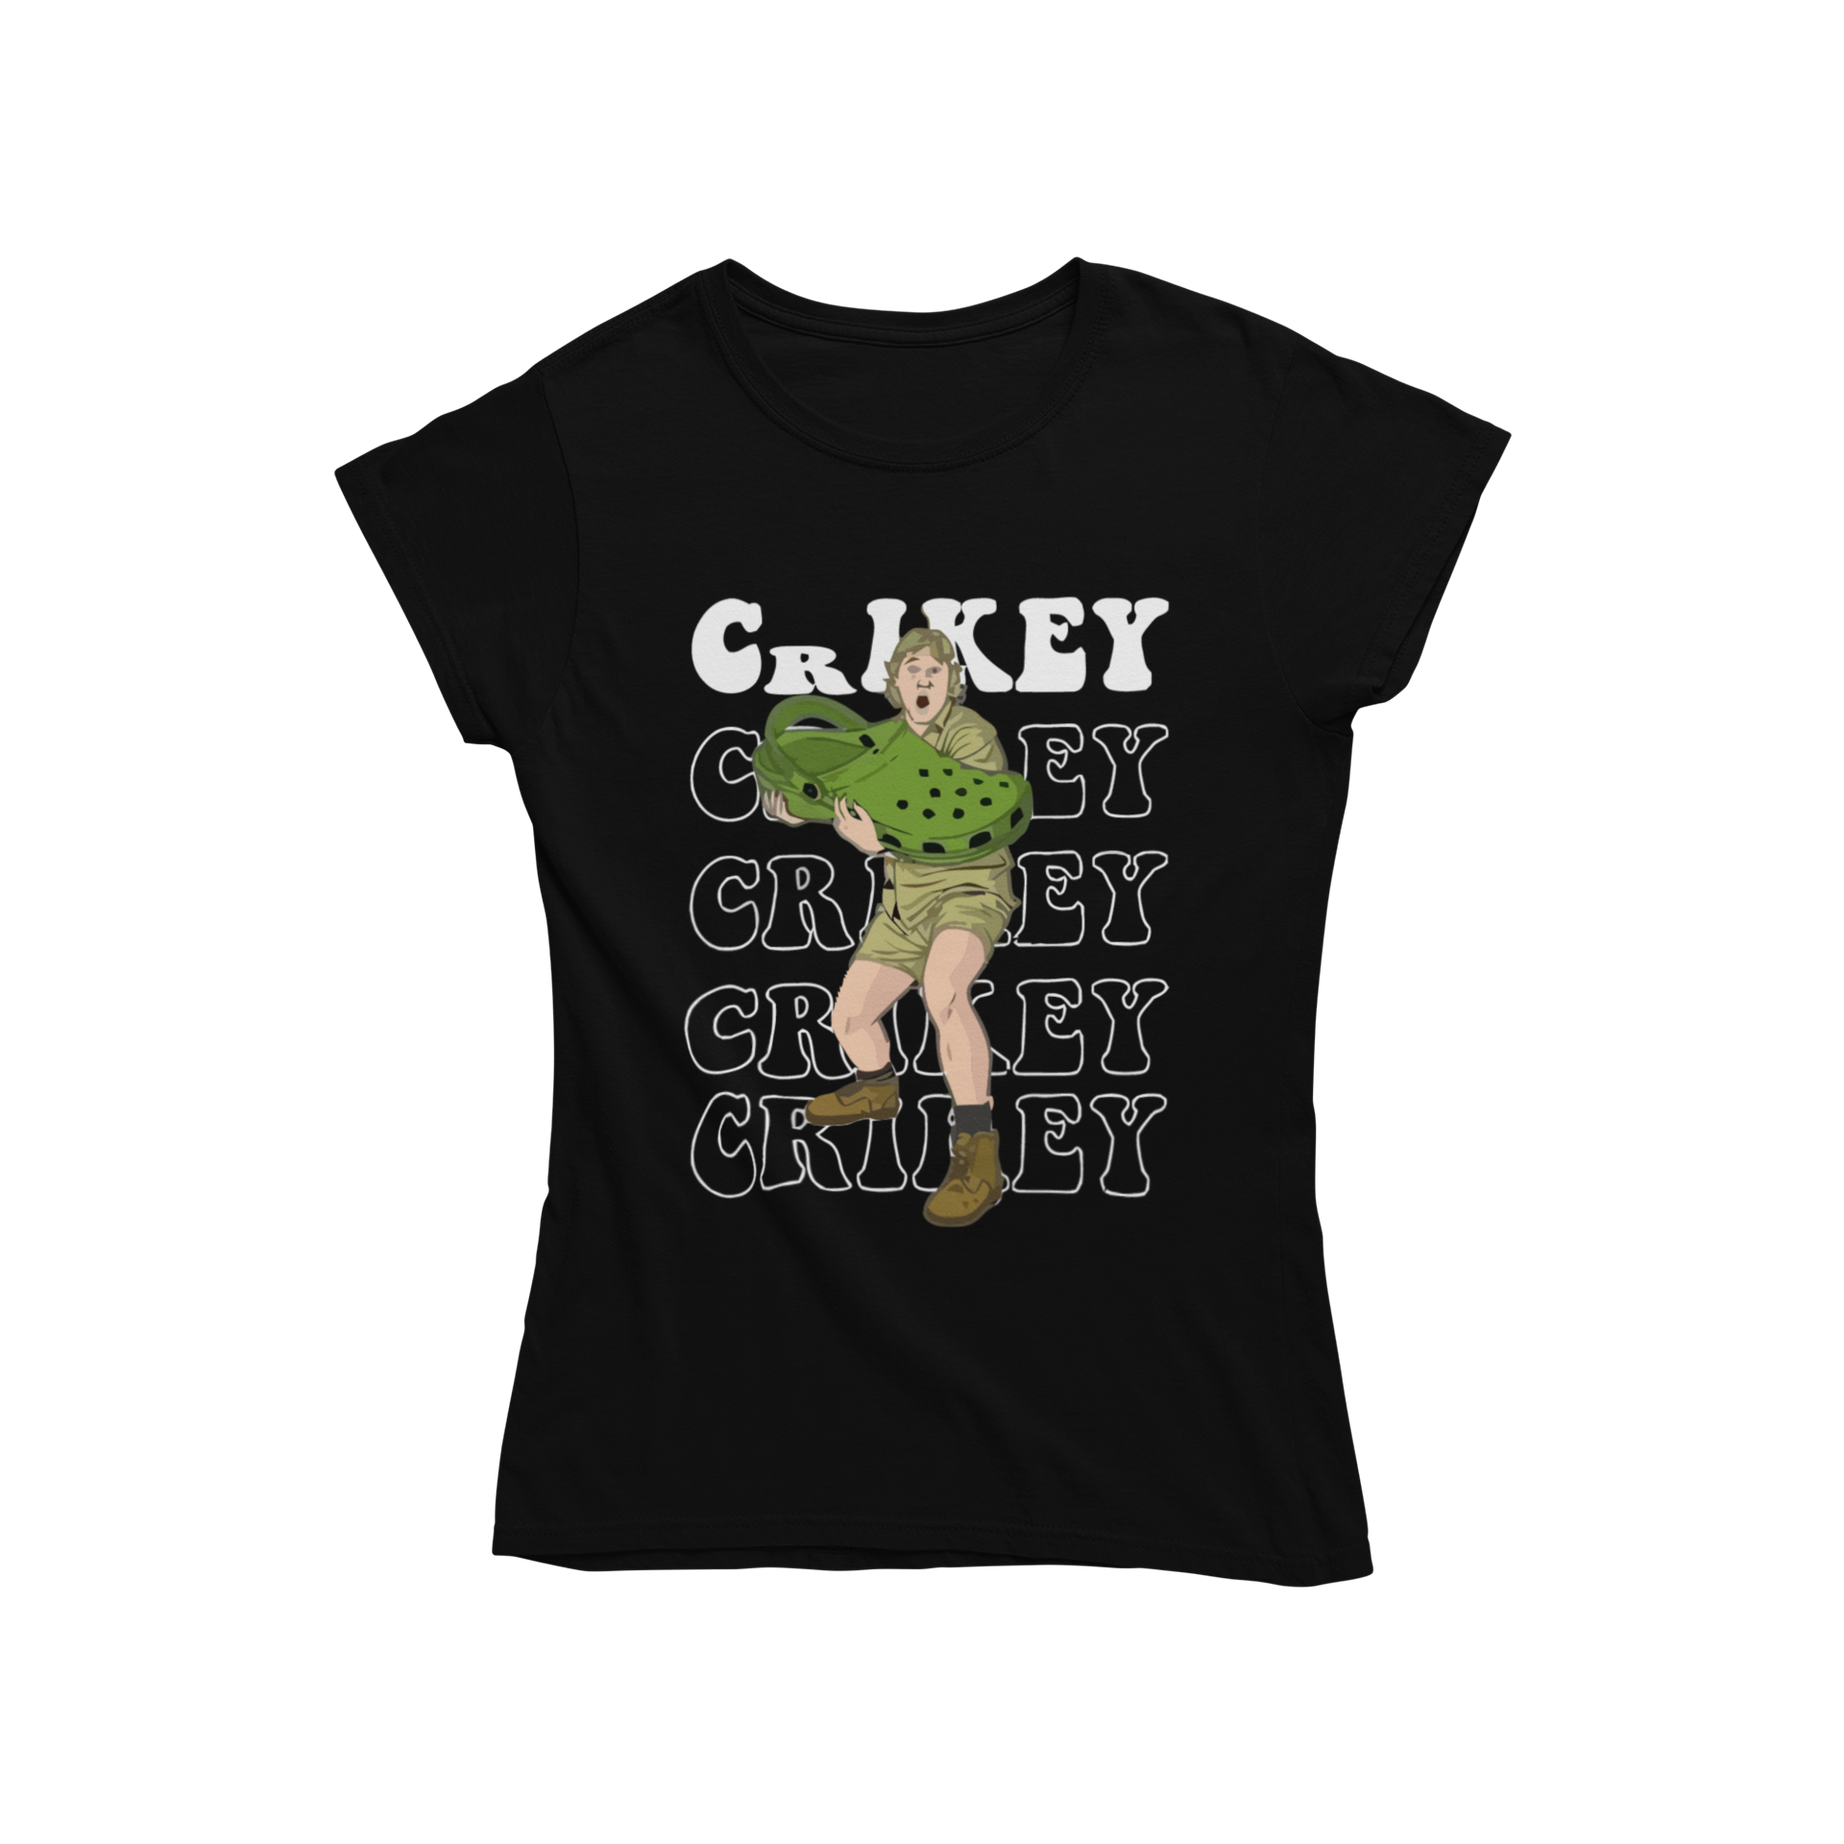 Are you a fan of Steve Irwin? Teevolution has designed a graphic fitted women's t-shirt inspired by the late Steve Irwin, his catchphrase "Crikey," and his fascination for crocs (not the shoe type). Get yours today and show your love for the Crocodile Hunter!